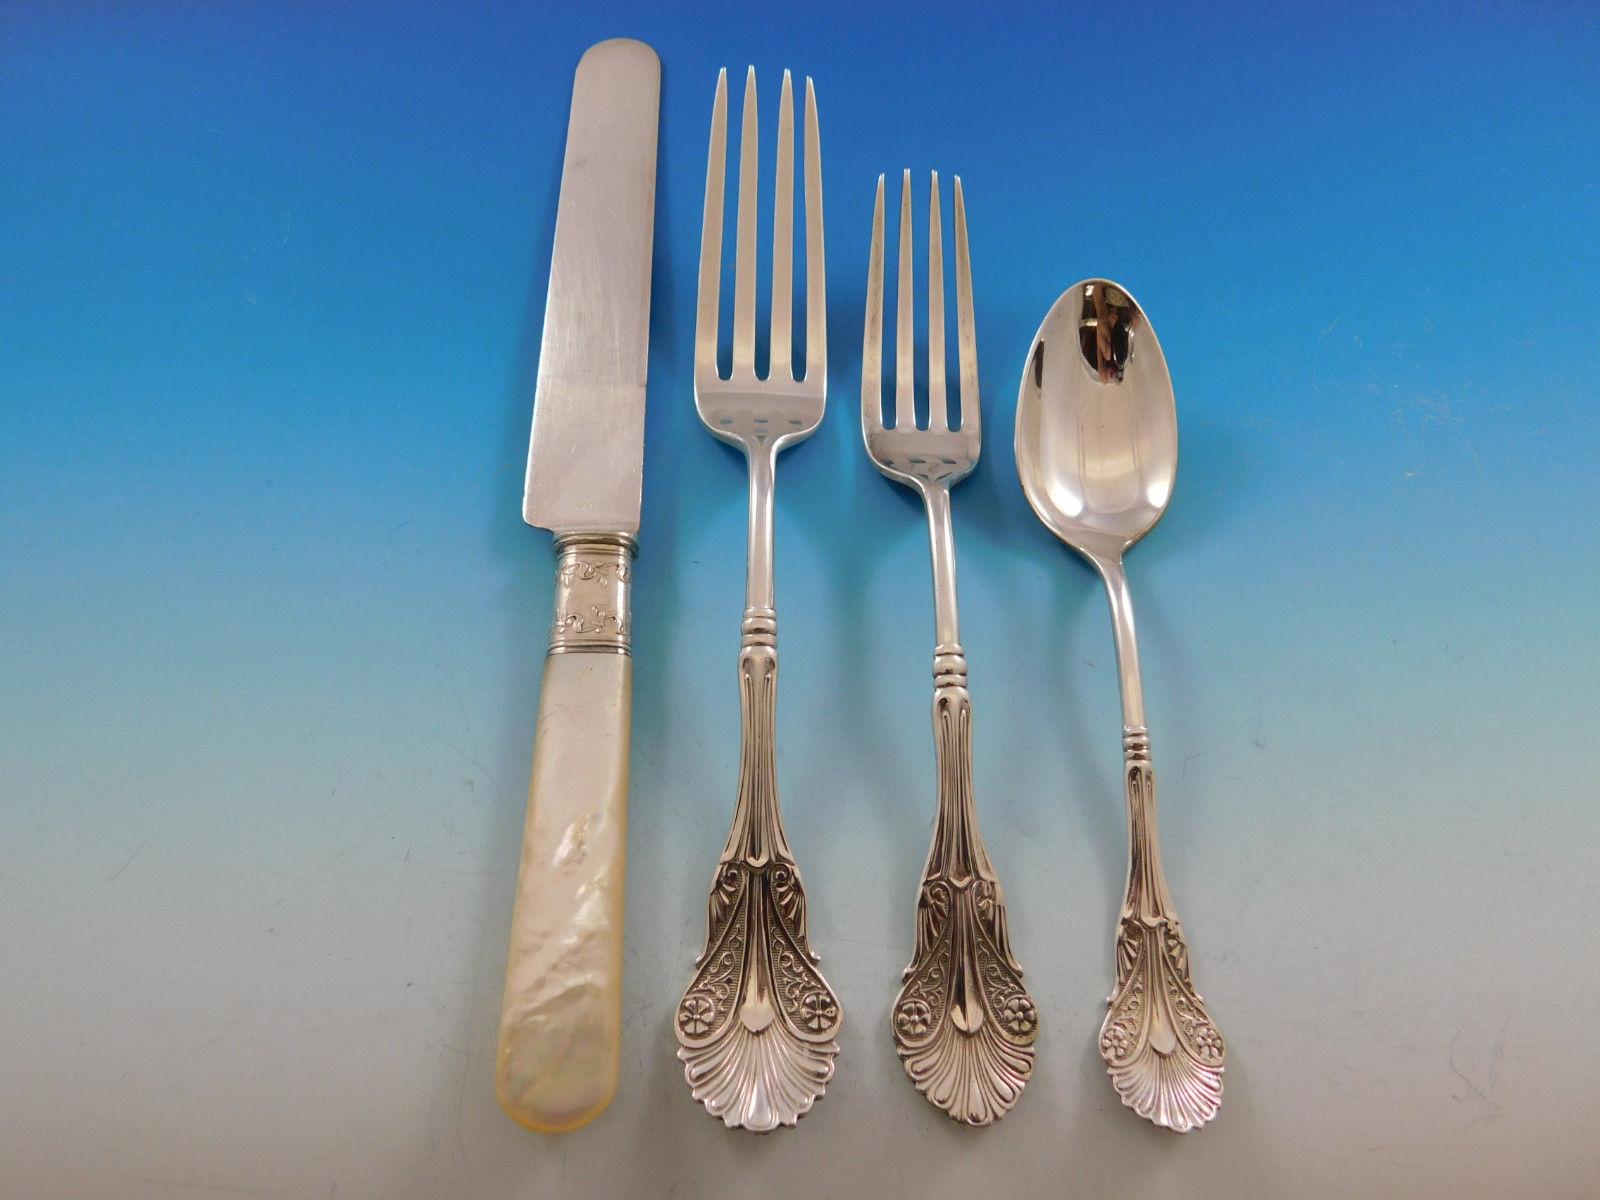 Rare Corinthian by Polhamus/Shiebler sterling silver flatware set - 72 pieces.
This set includes:

12 mother-of-pearl handle knives with sterling collars, 9 1/4